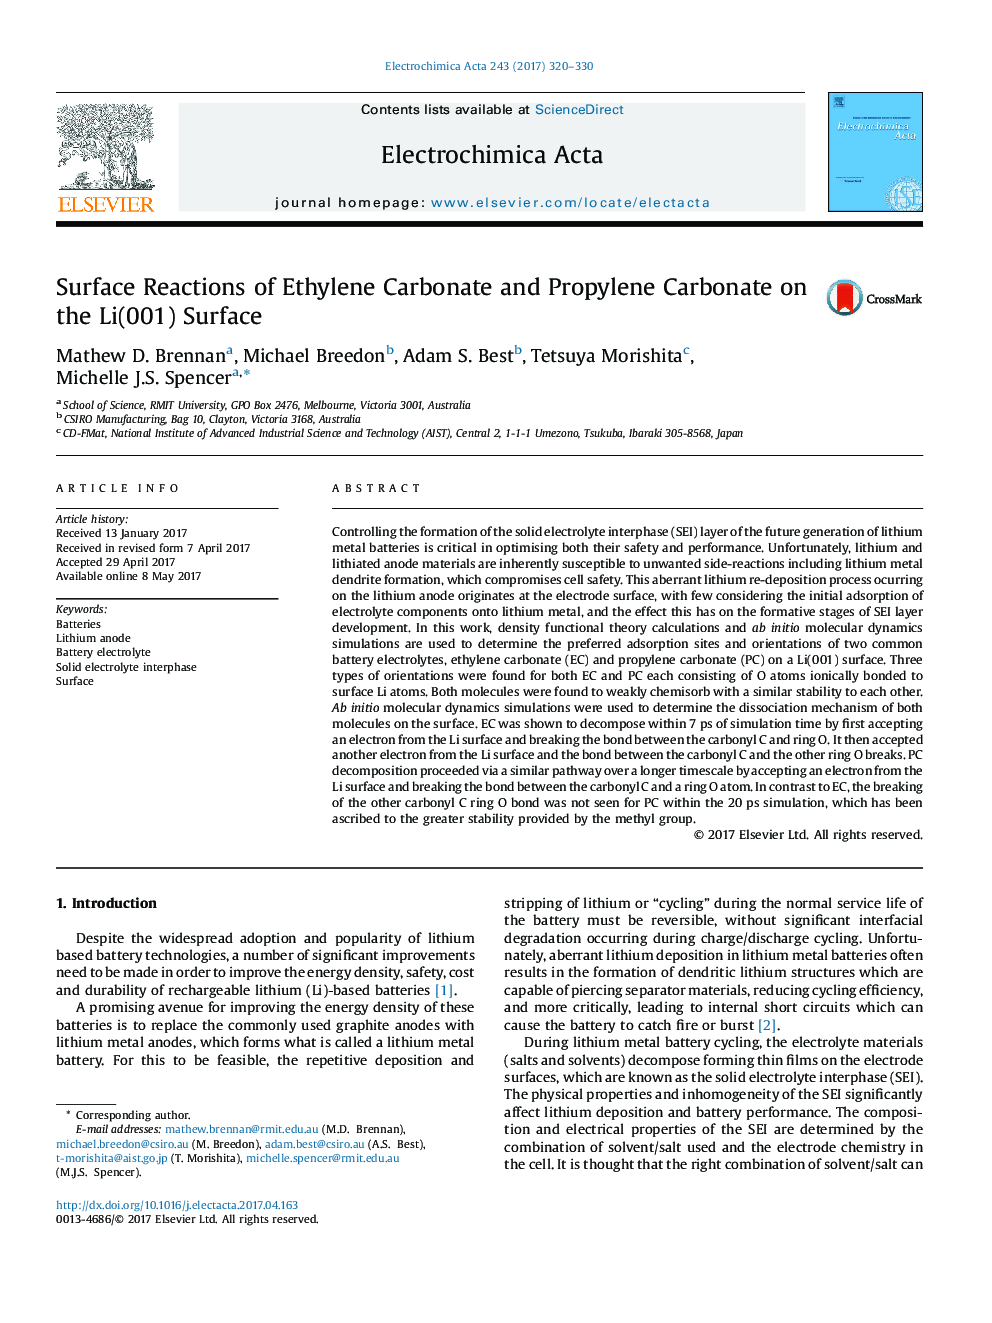 Surface Reactions of Ethylene Carbonate and Propylene Carbonate on the Li(001) Surface